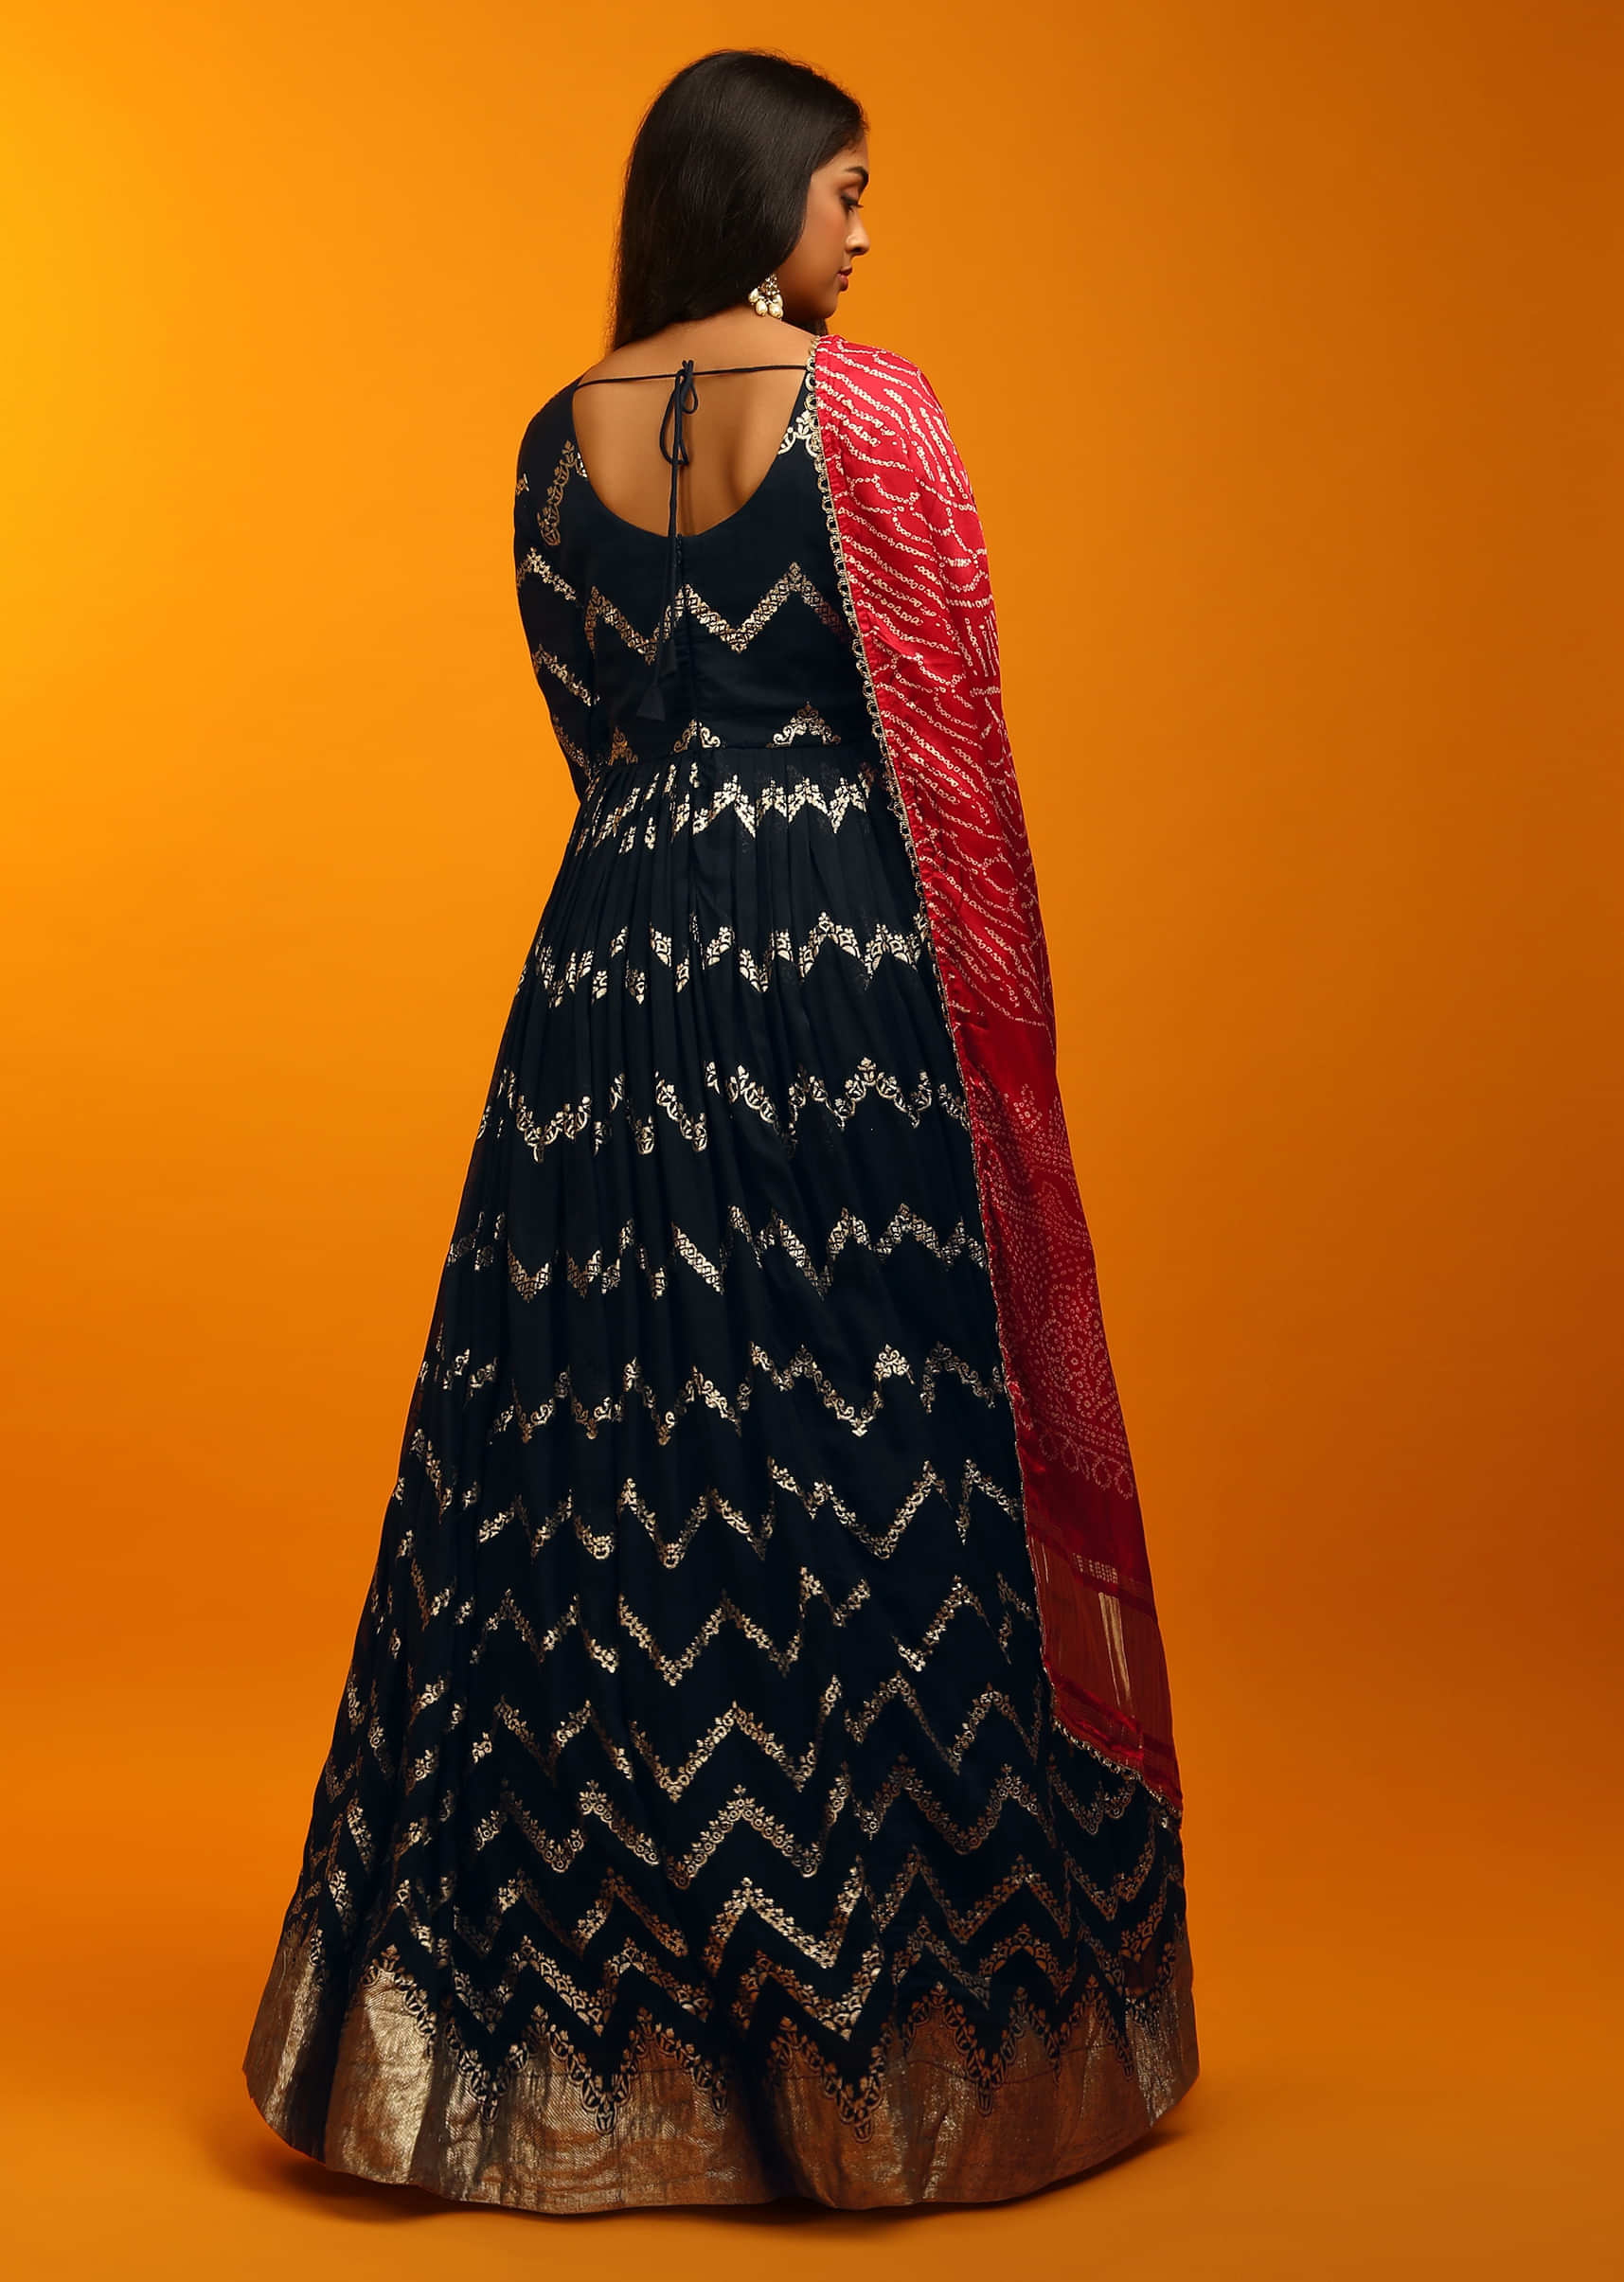 Midnight Blue Anarkali Suit In Brocade Silk With Woven Chevron Design And Red Bandhani Dupatta